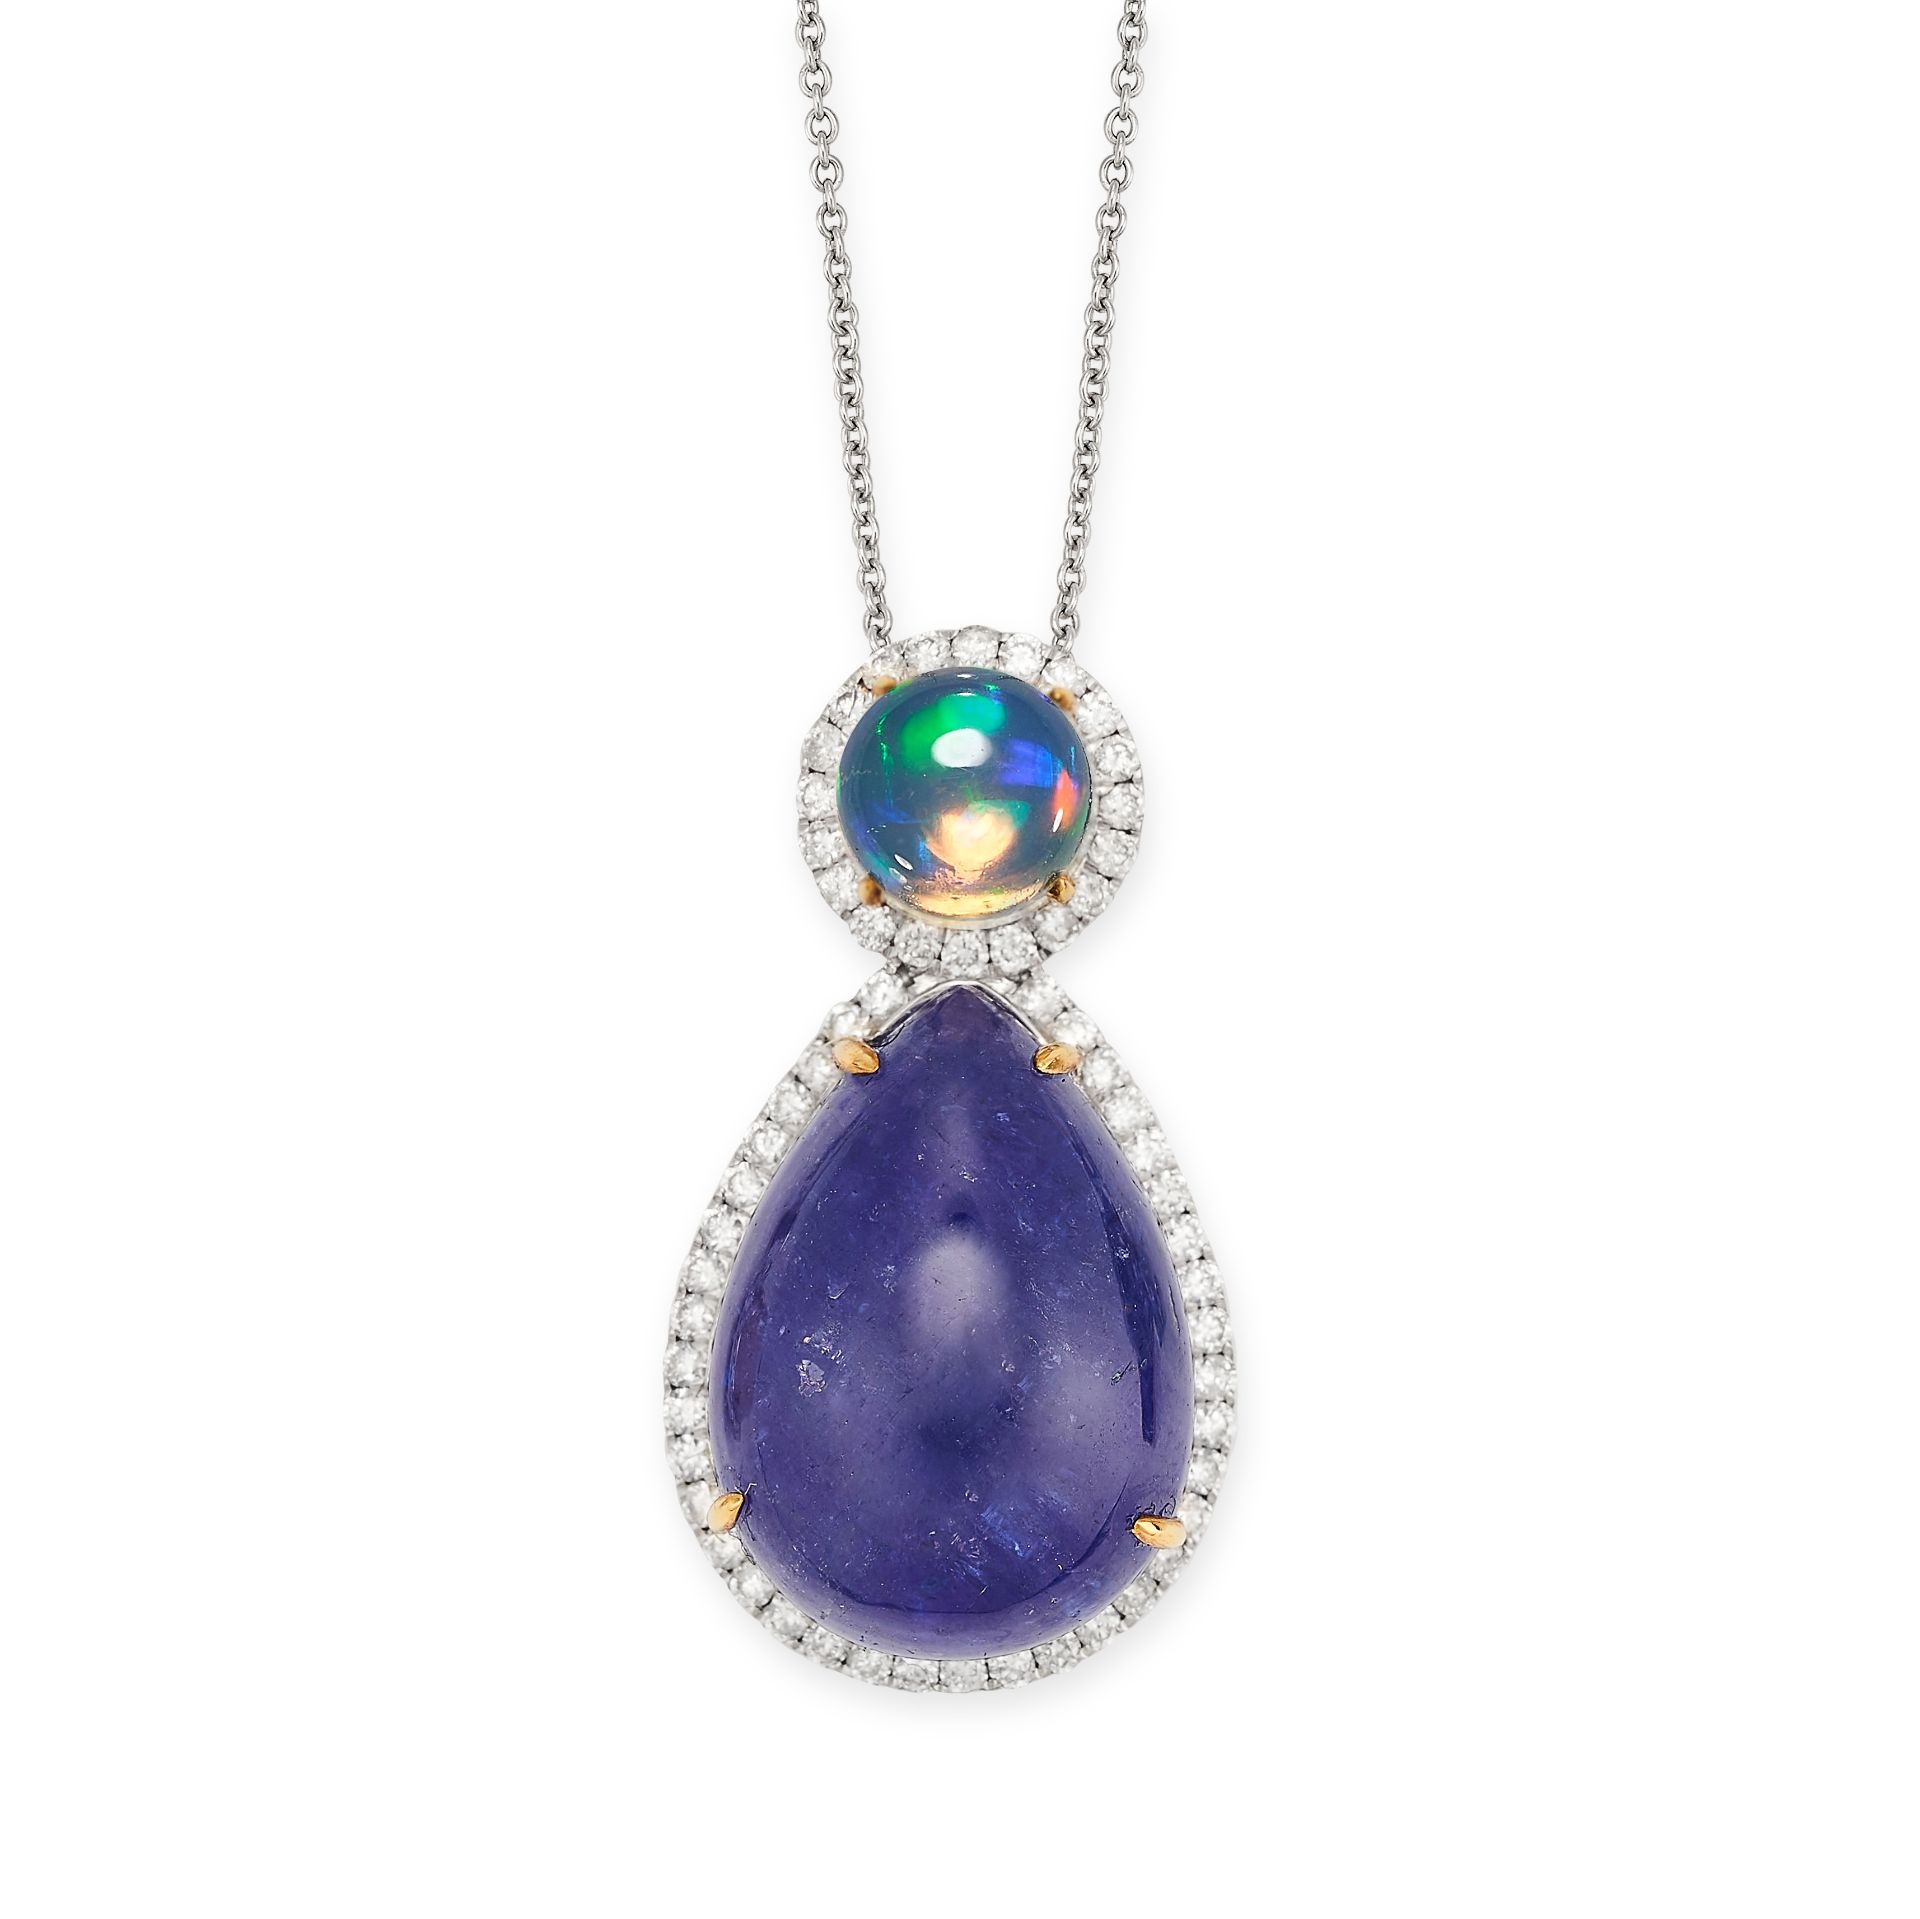 A TANZANITE, OPAL AND DIAMOND PENDANT NECKLACE set with a pear cabochon tanzanite of 16.50 carats